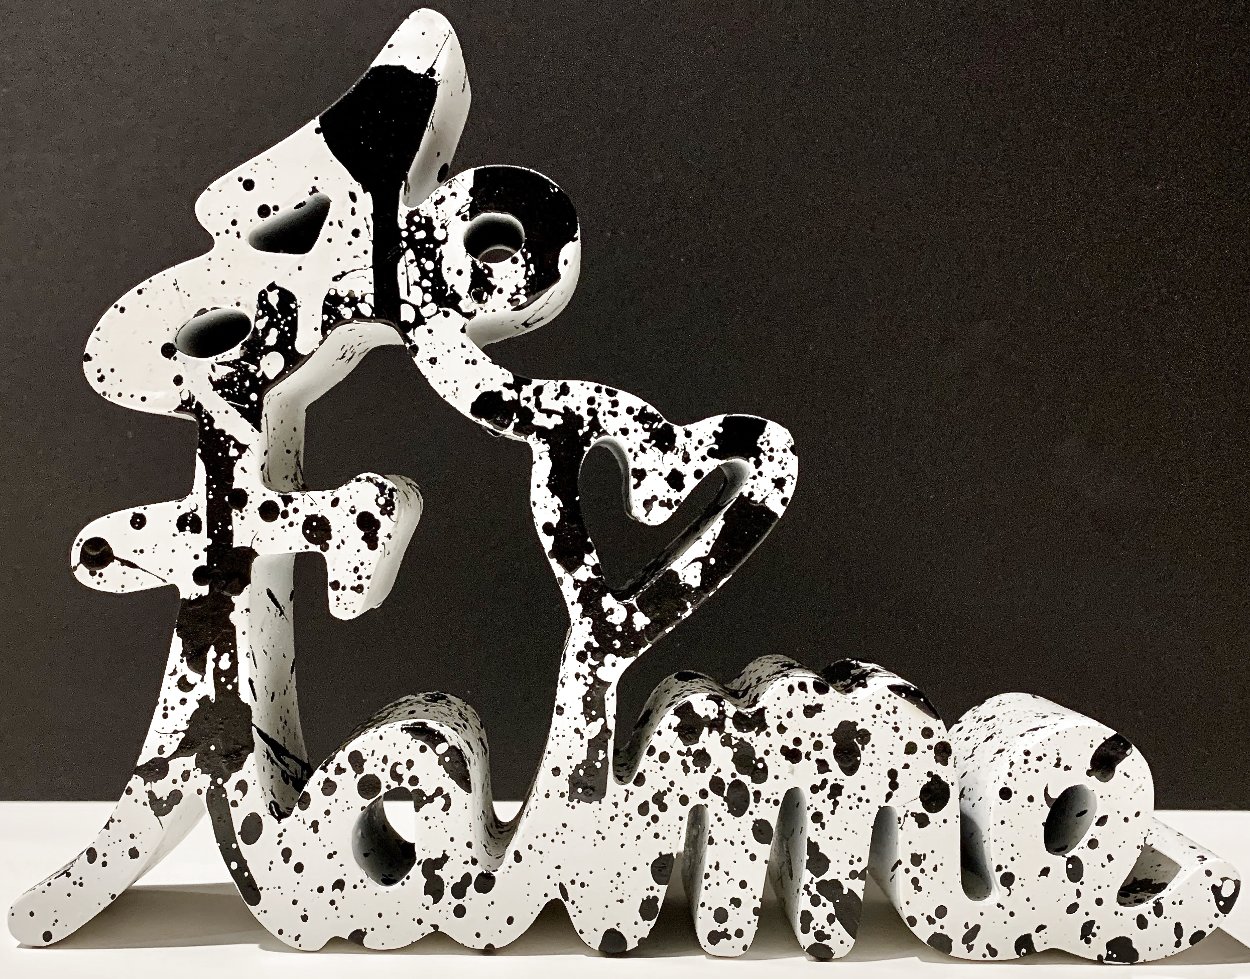 Je T'aime (I Love You) Acrylic Sculpture 2018 9 in  Sculpture by Mr. Brainwash